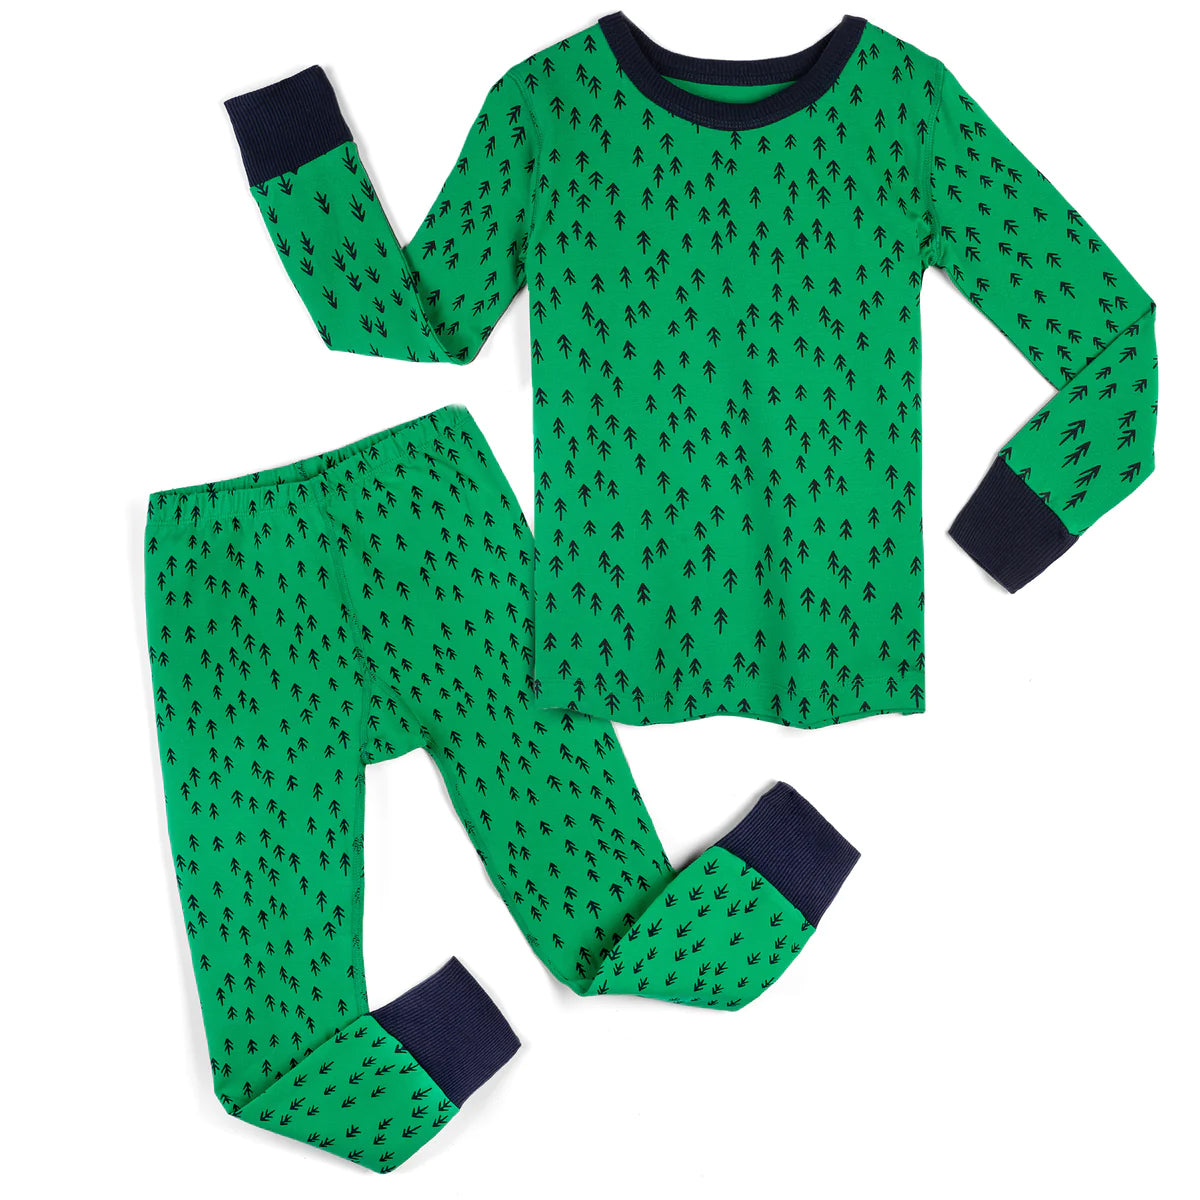 Pre-owned Evergreen PJ Set size: Adult XS-XL